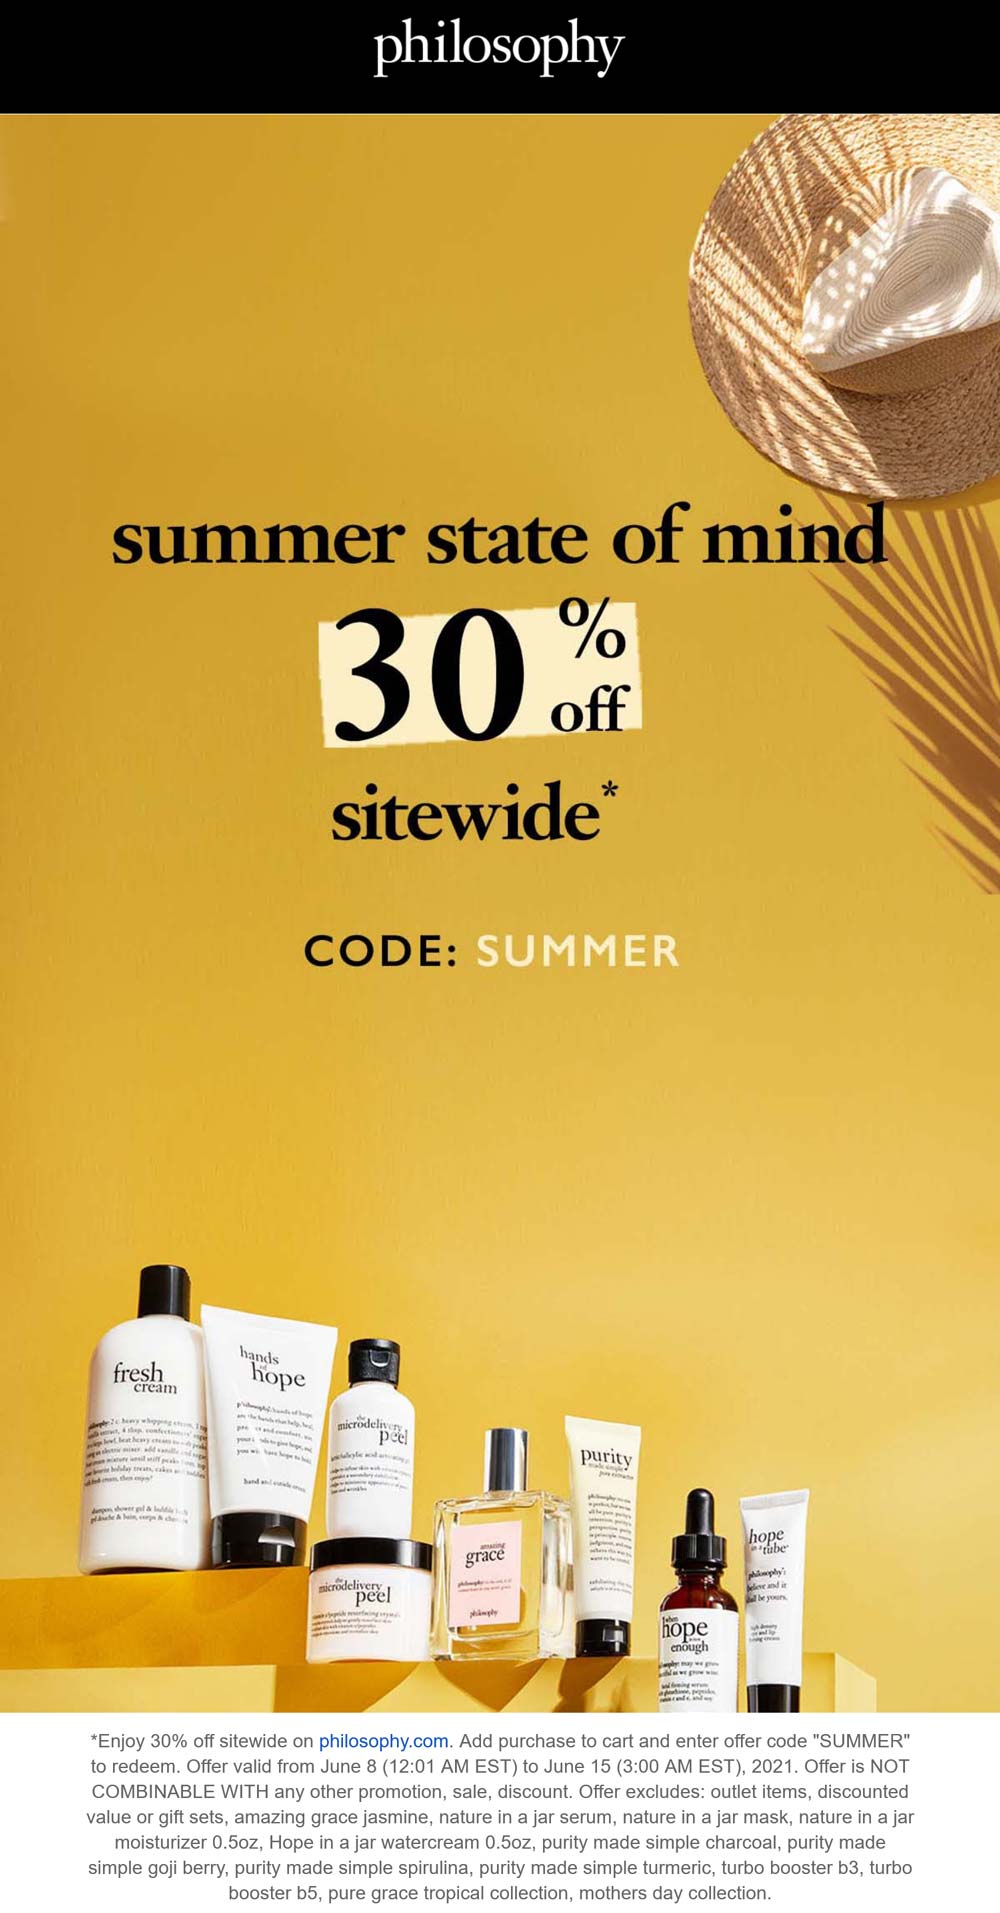 Philosophy stores Coupon  30% off everything online today at Philosophy via promo code SUMMER #philosophy 